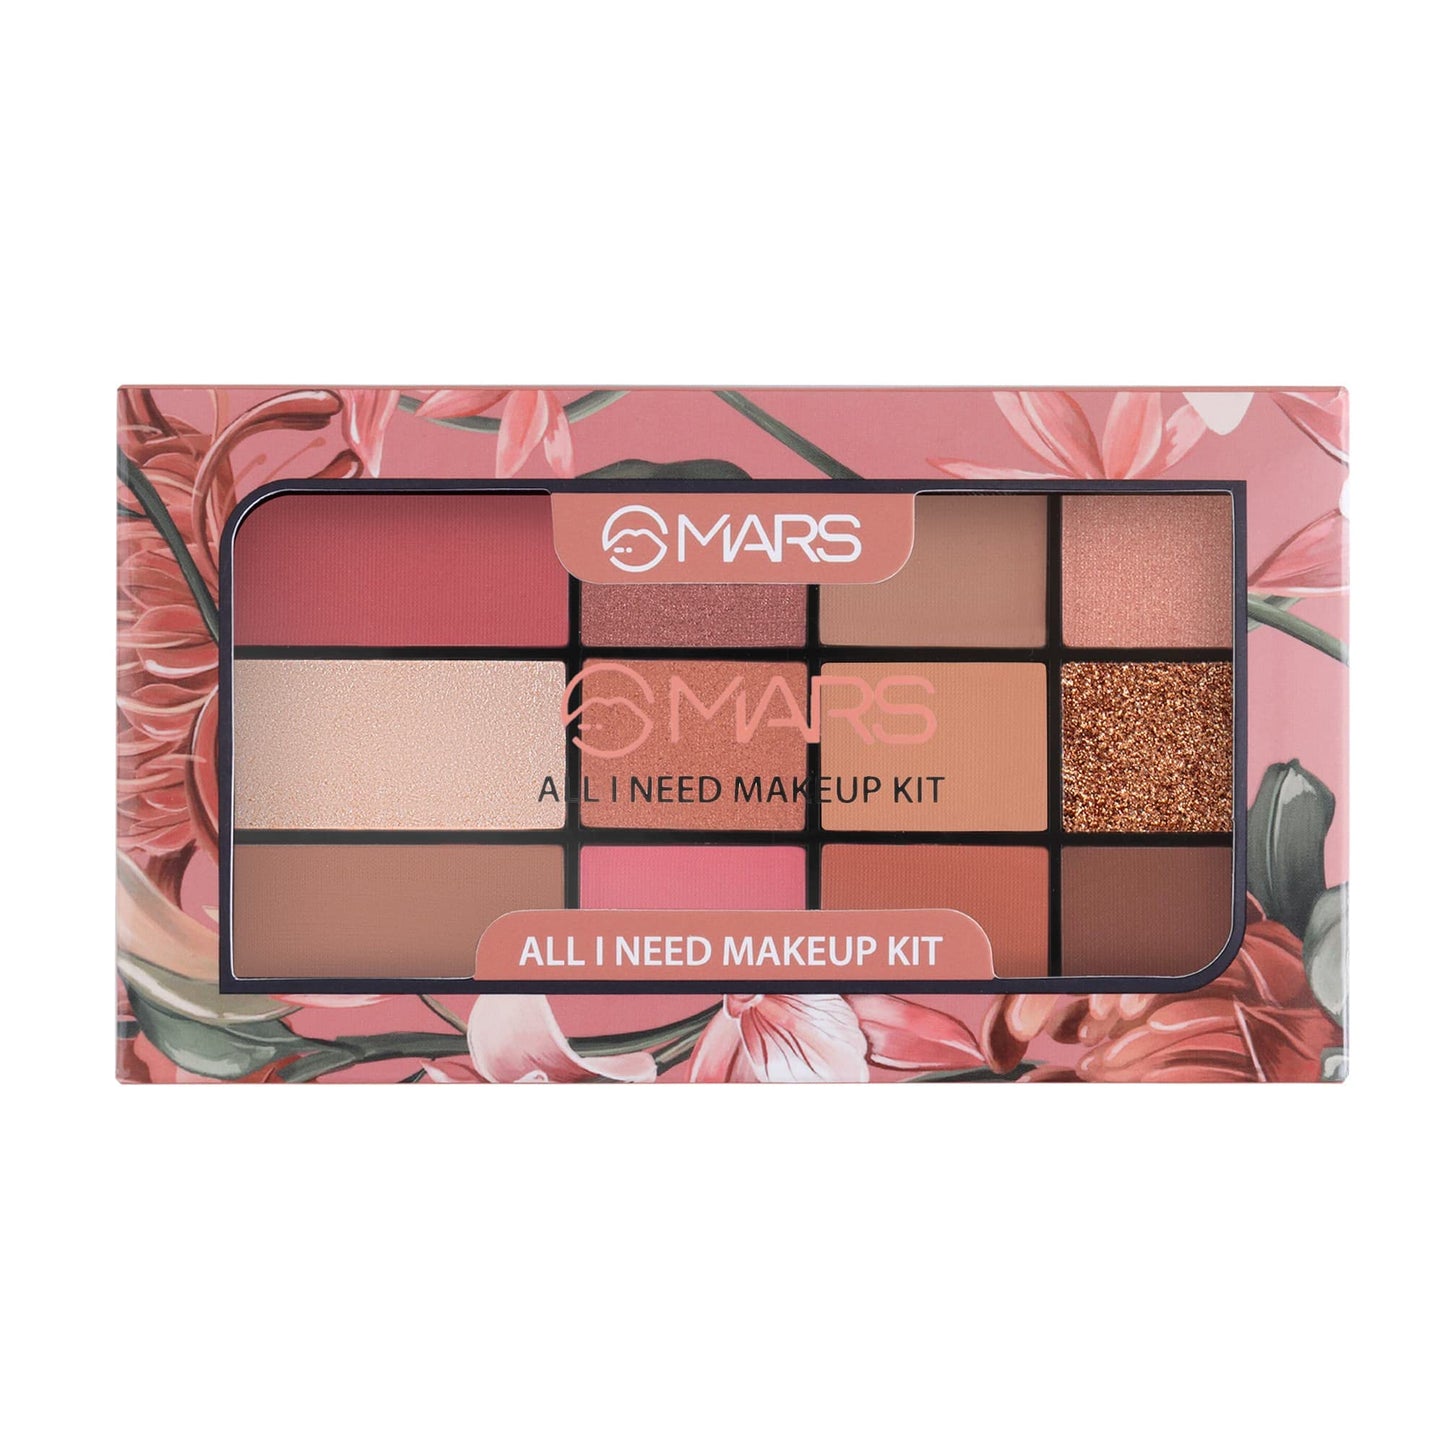 MARS All I Need Makeup And Eyeshadow Powder Kit | 9 Eyeshadows With Blusher Bronzer And Highlighter | Matte Long Lasting & Highly Pigmented (21.5 G) (Multicolor-01)